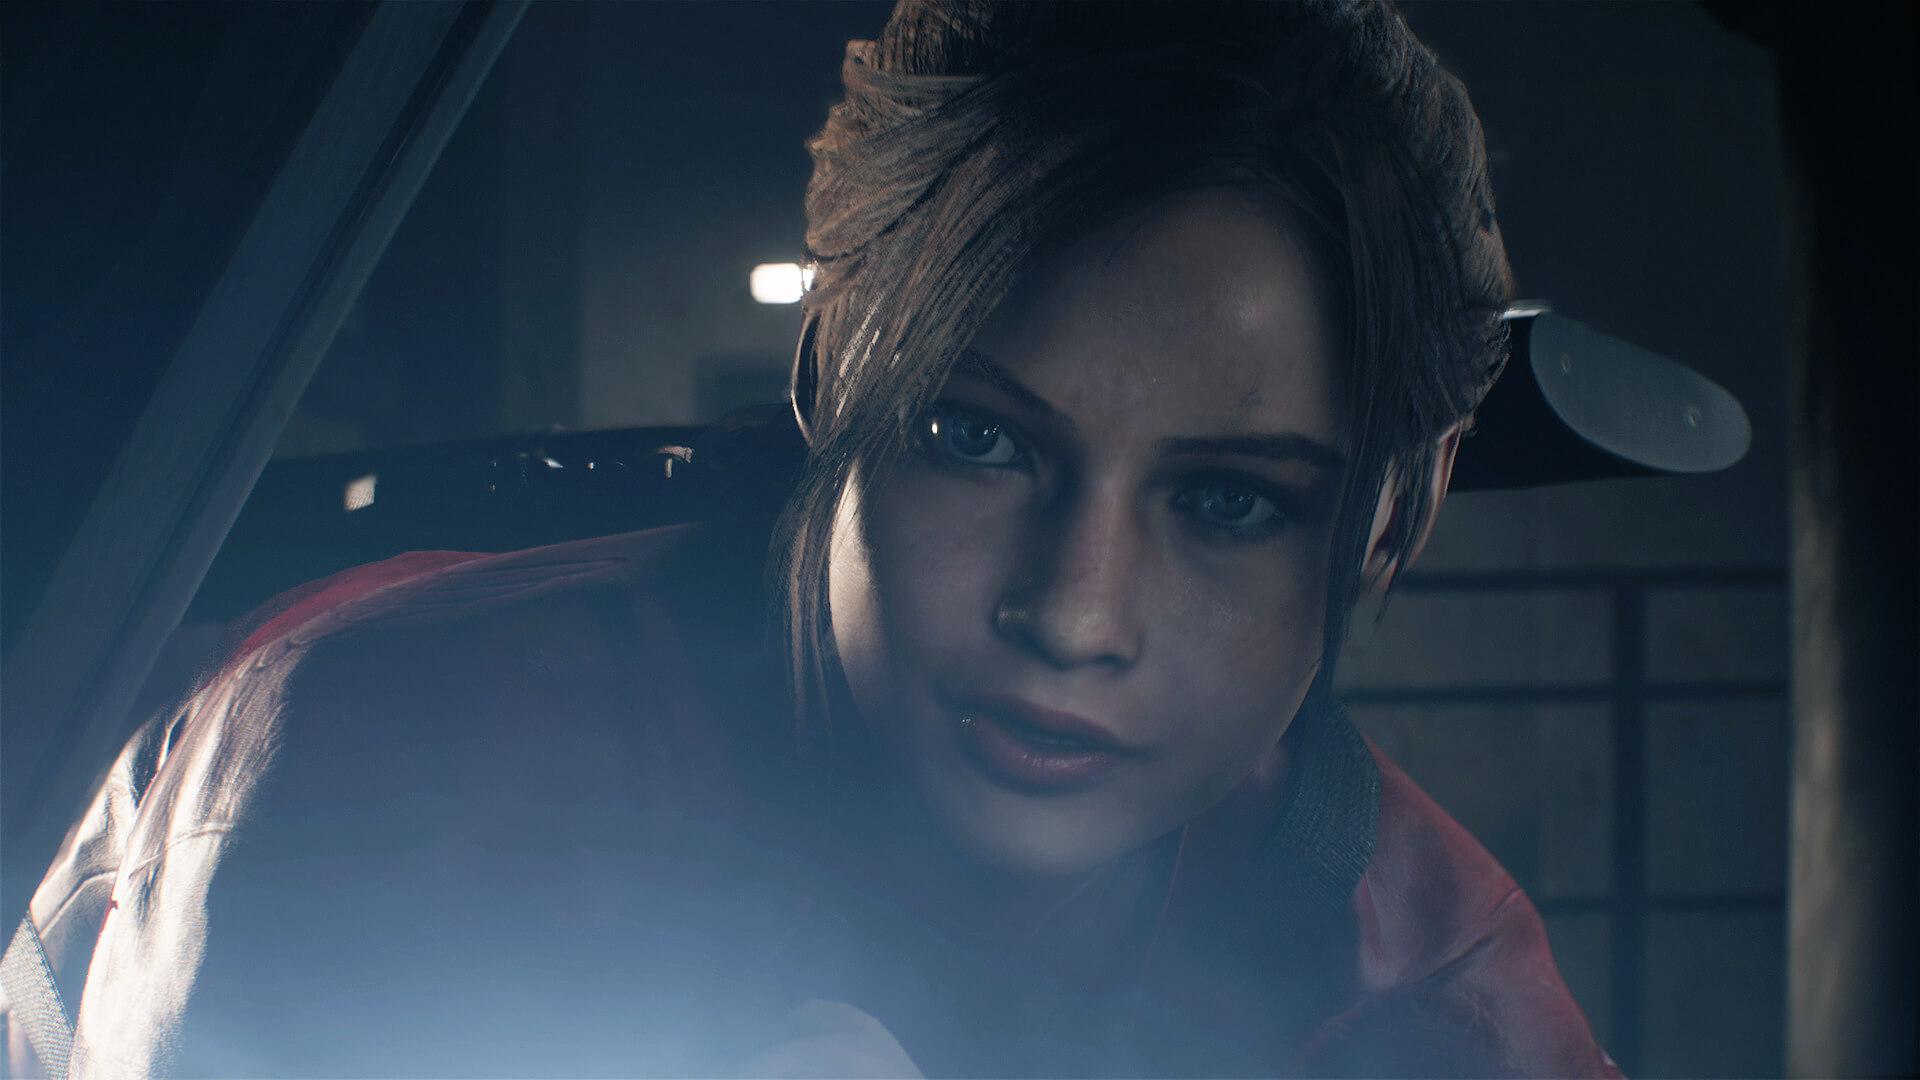 Resident Evil 2 Remake Classic Ver of Claire Redfield and Leon S